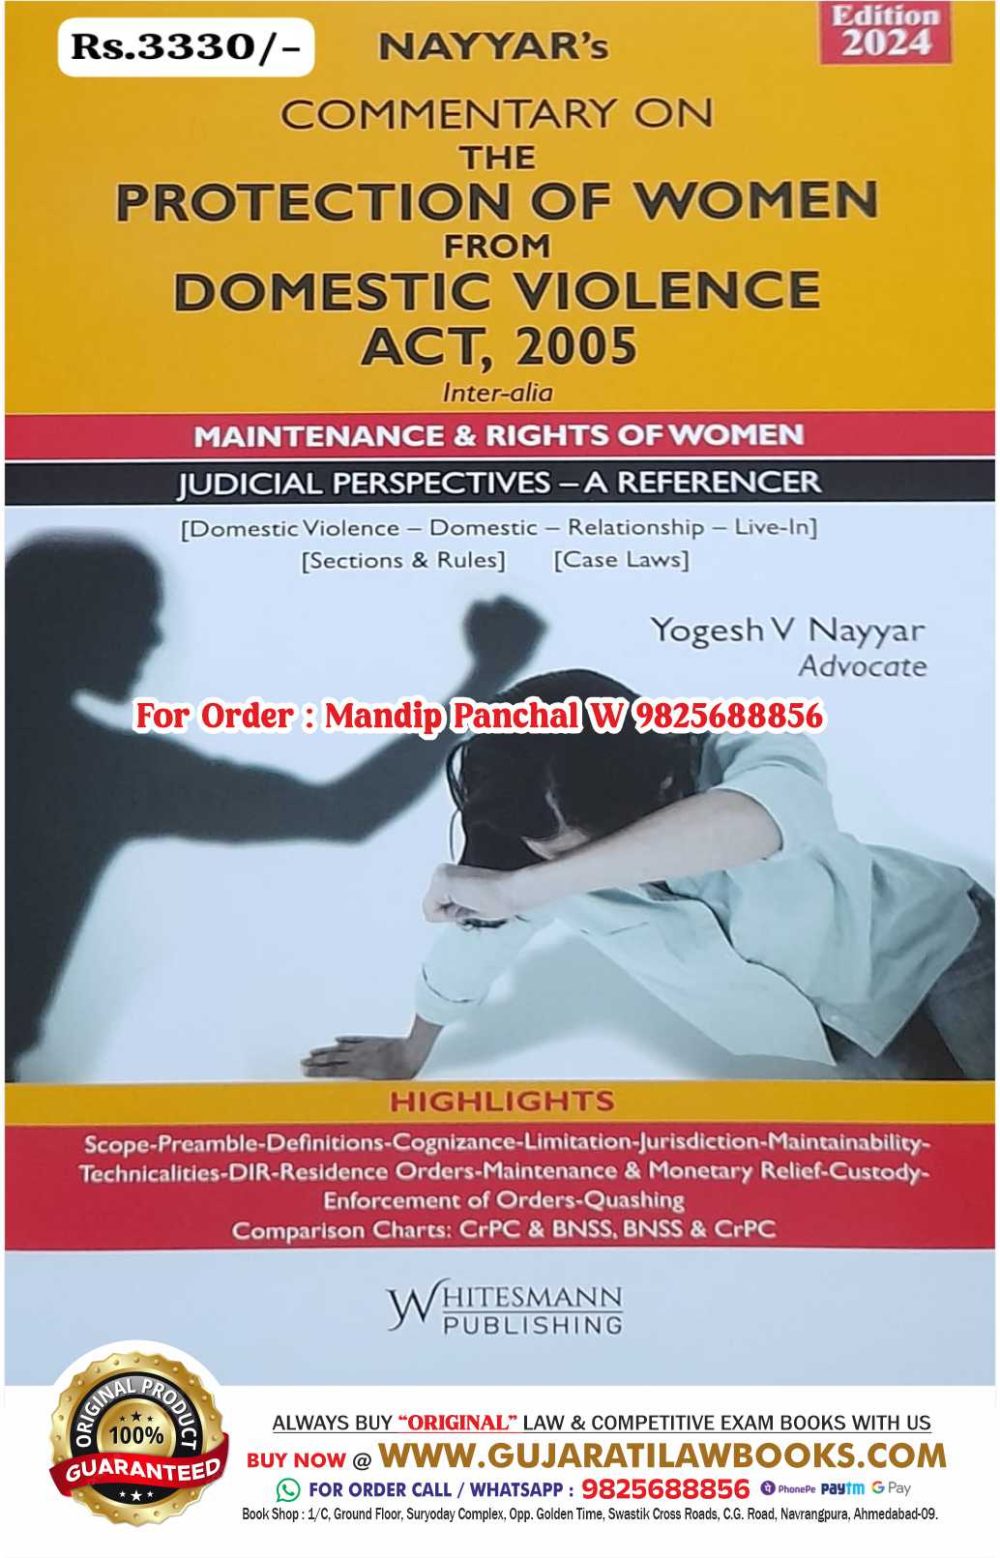 Nayyar's COMMENTARY ON THE PROTECTION OF WOMEN FROM DOMESTIC VIOLENCE ACT, 2005 - Latest March 2024 Edition Whitesmann